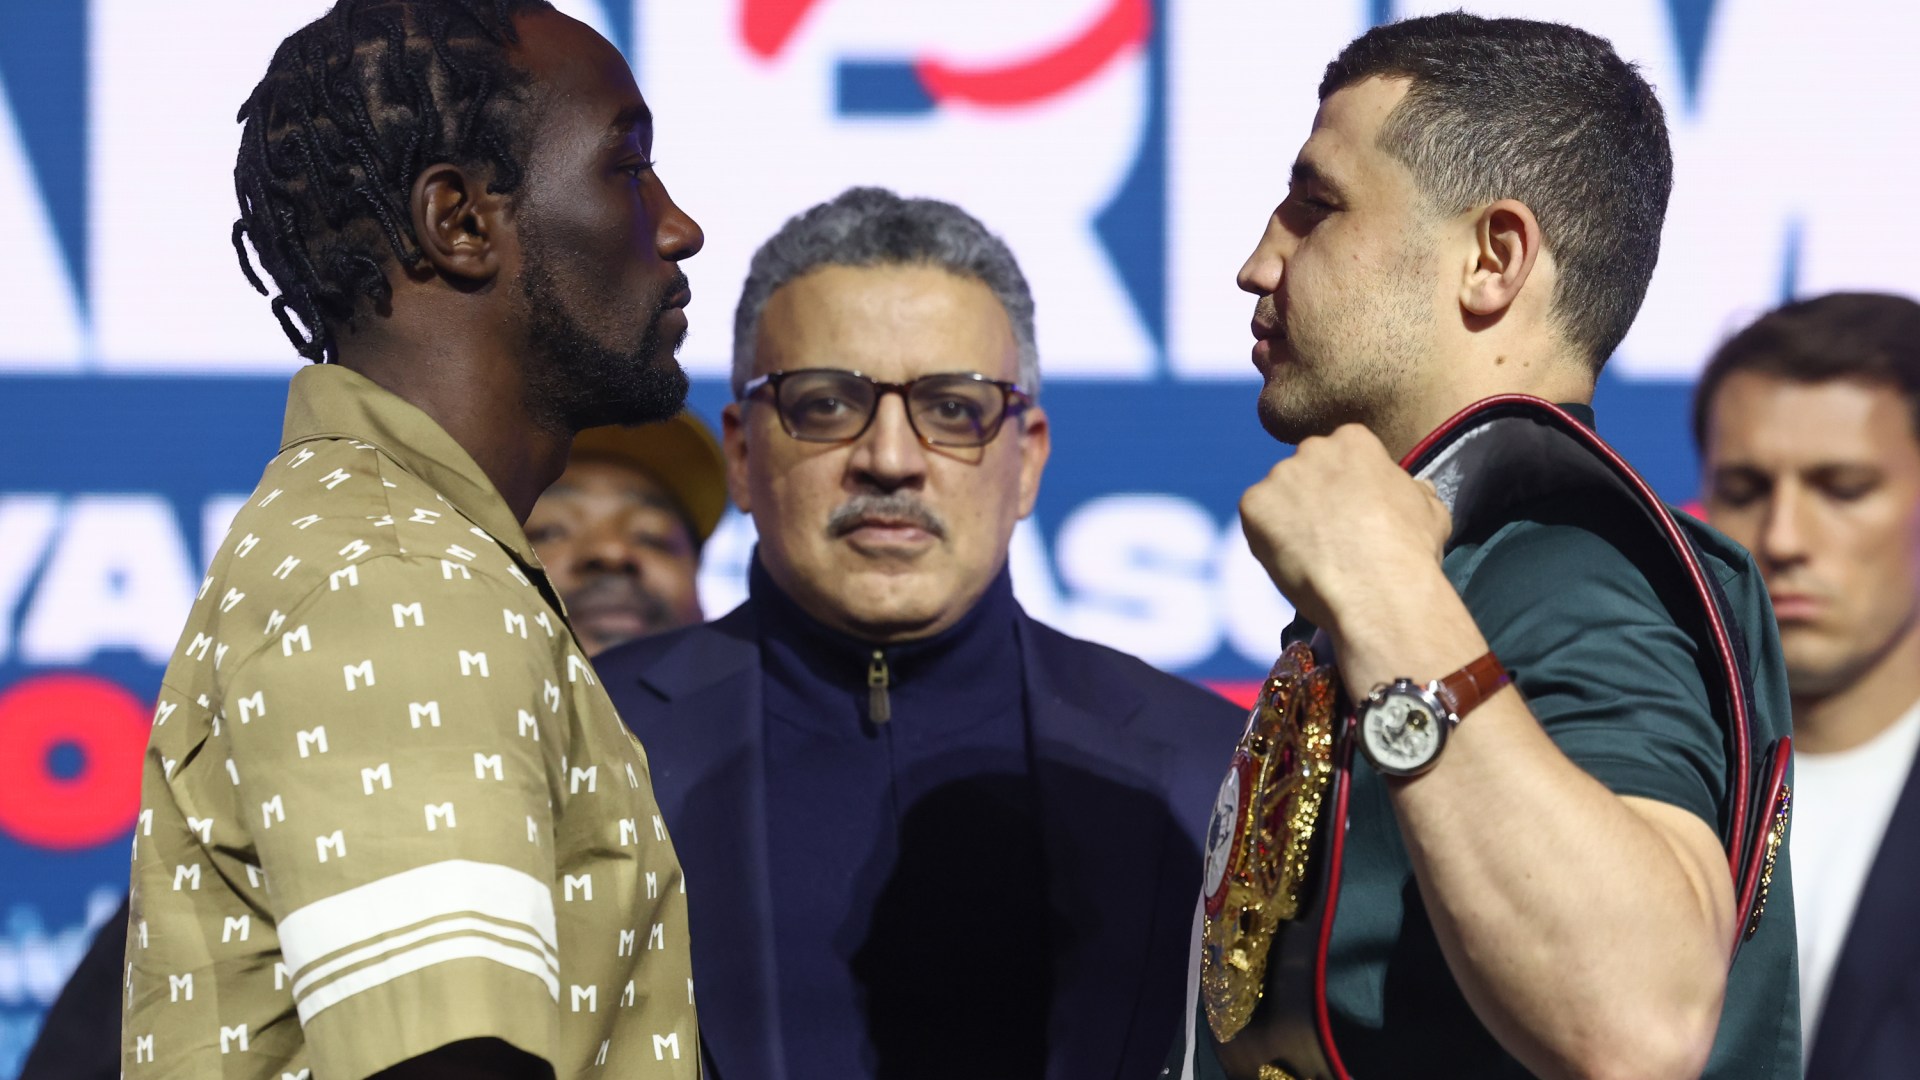 Terence Crawford vs Israil Madrimov LIVE: Date, UK start time, undercard and how to follow as undefeated superstar eyes another world title [Video]